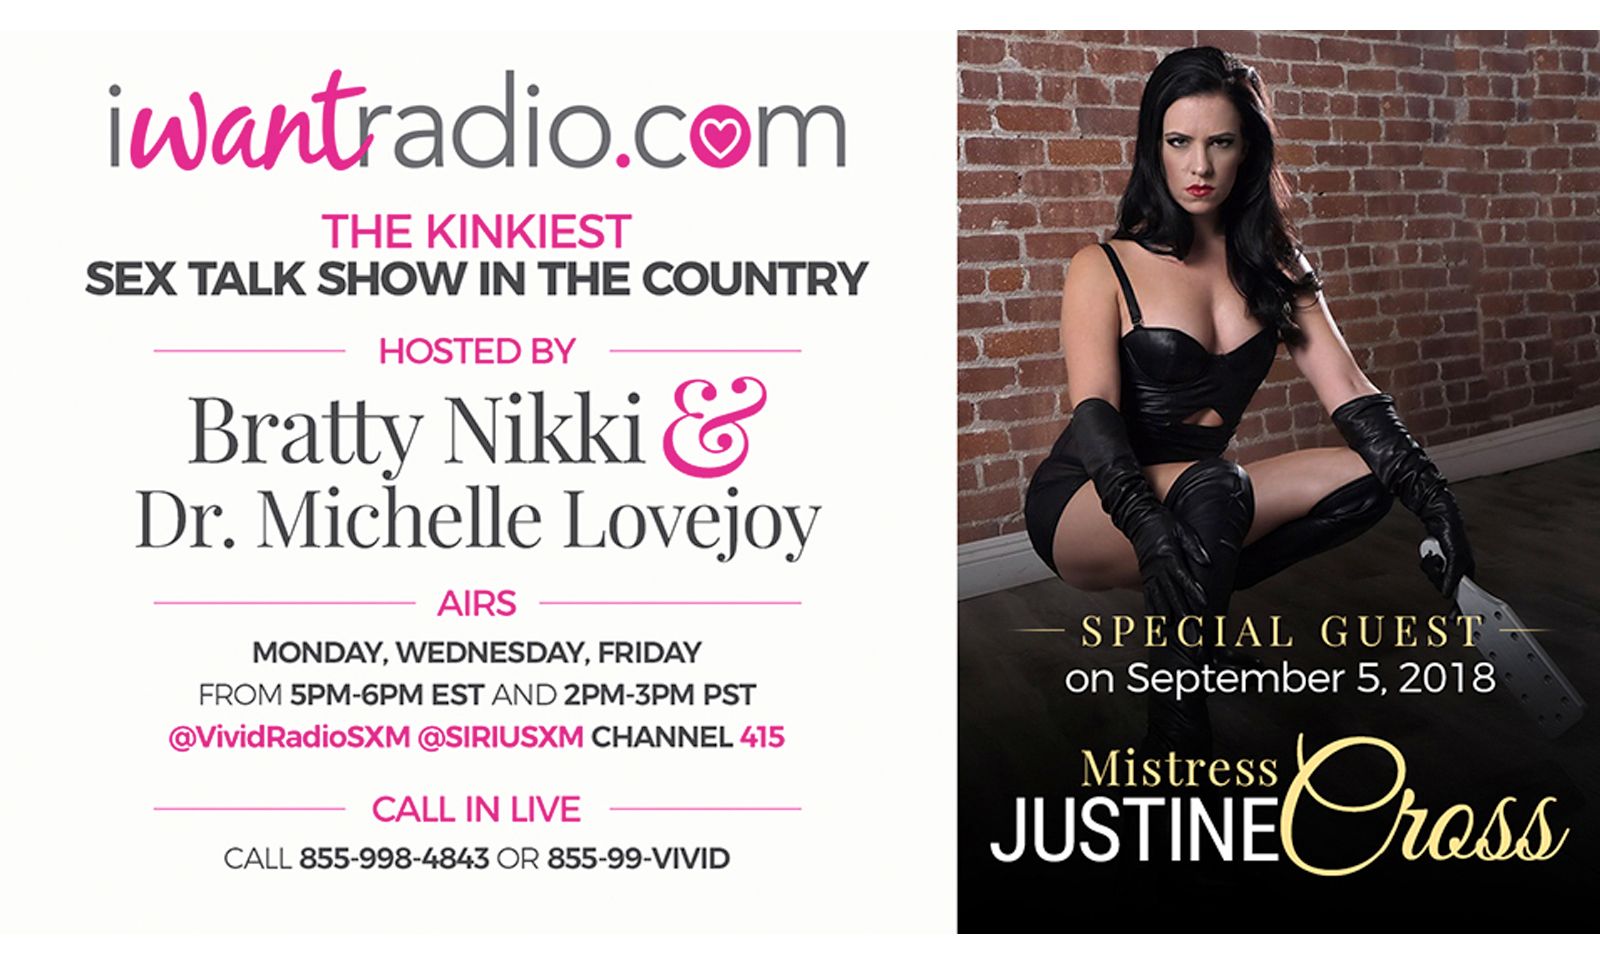 Mistress Justine Cross Featured on ‘iWantRadio’ Today  